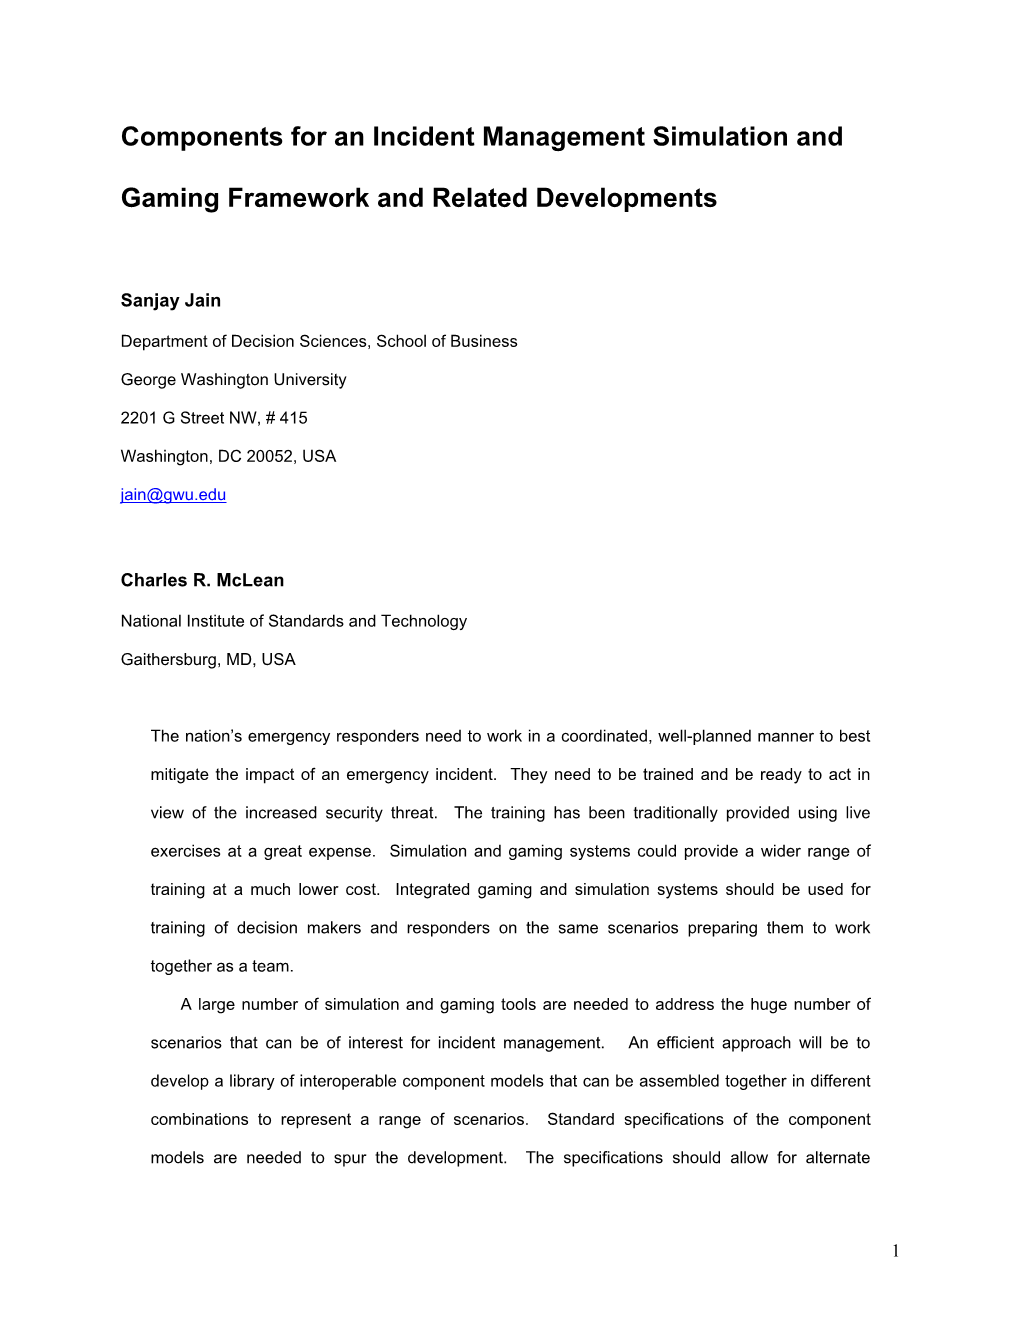 Components for an Incident Management Simulation and Gaming Framework and Related Developments